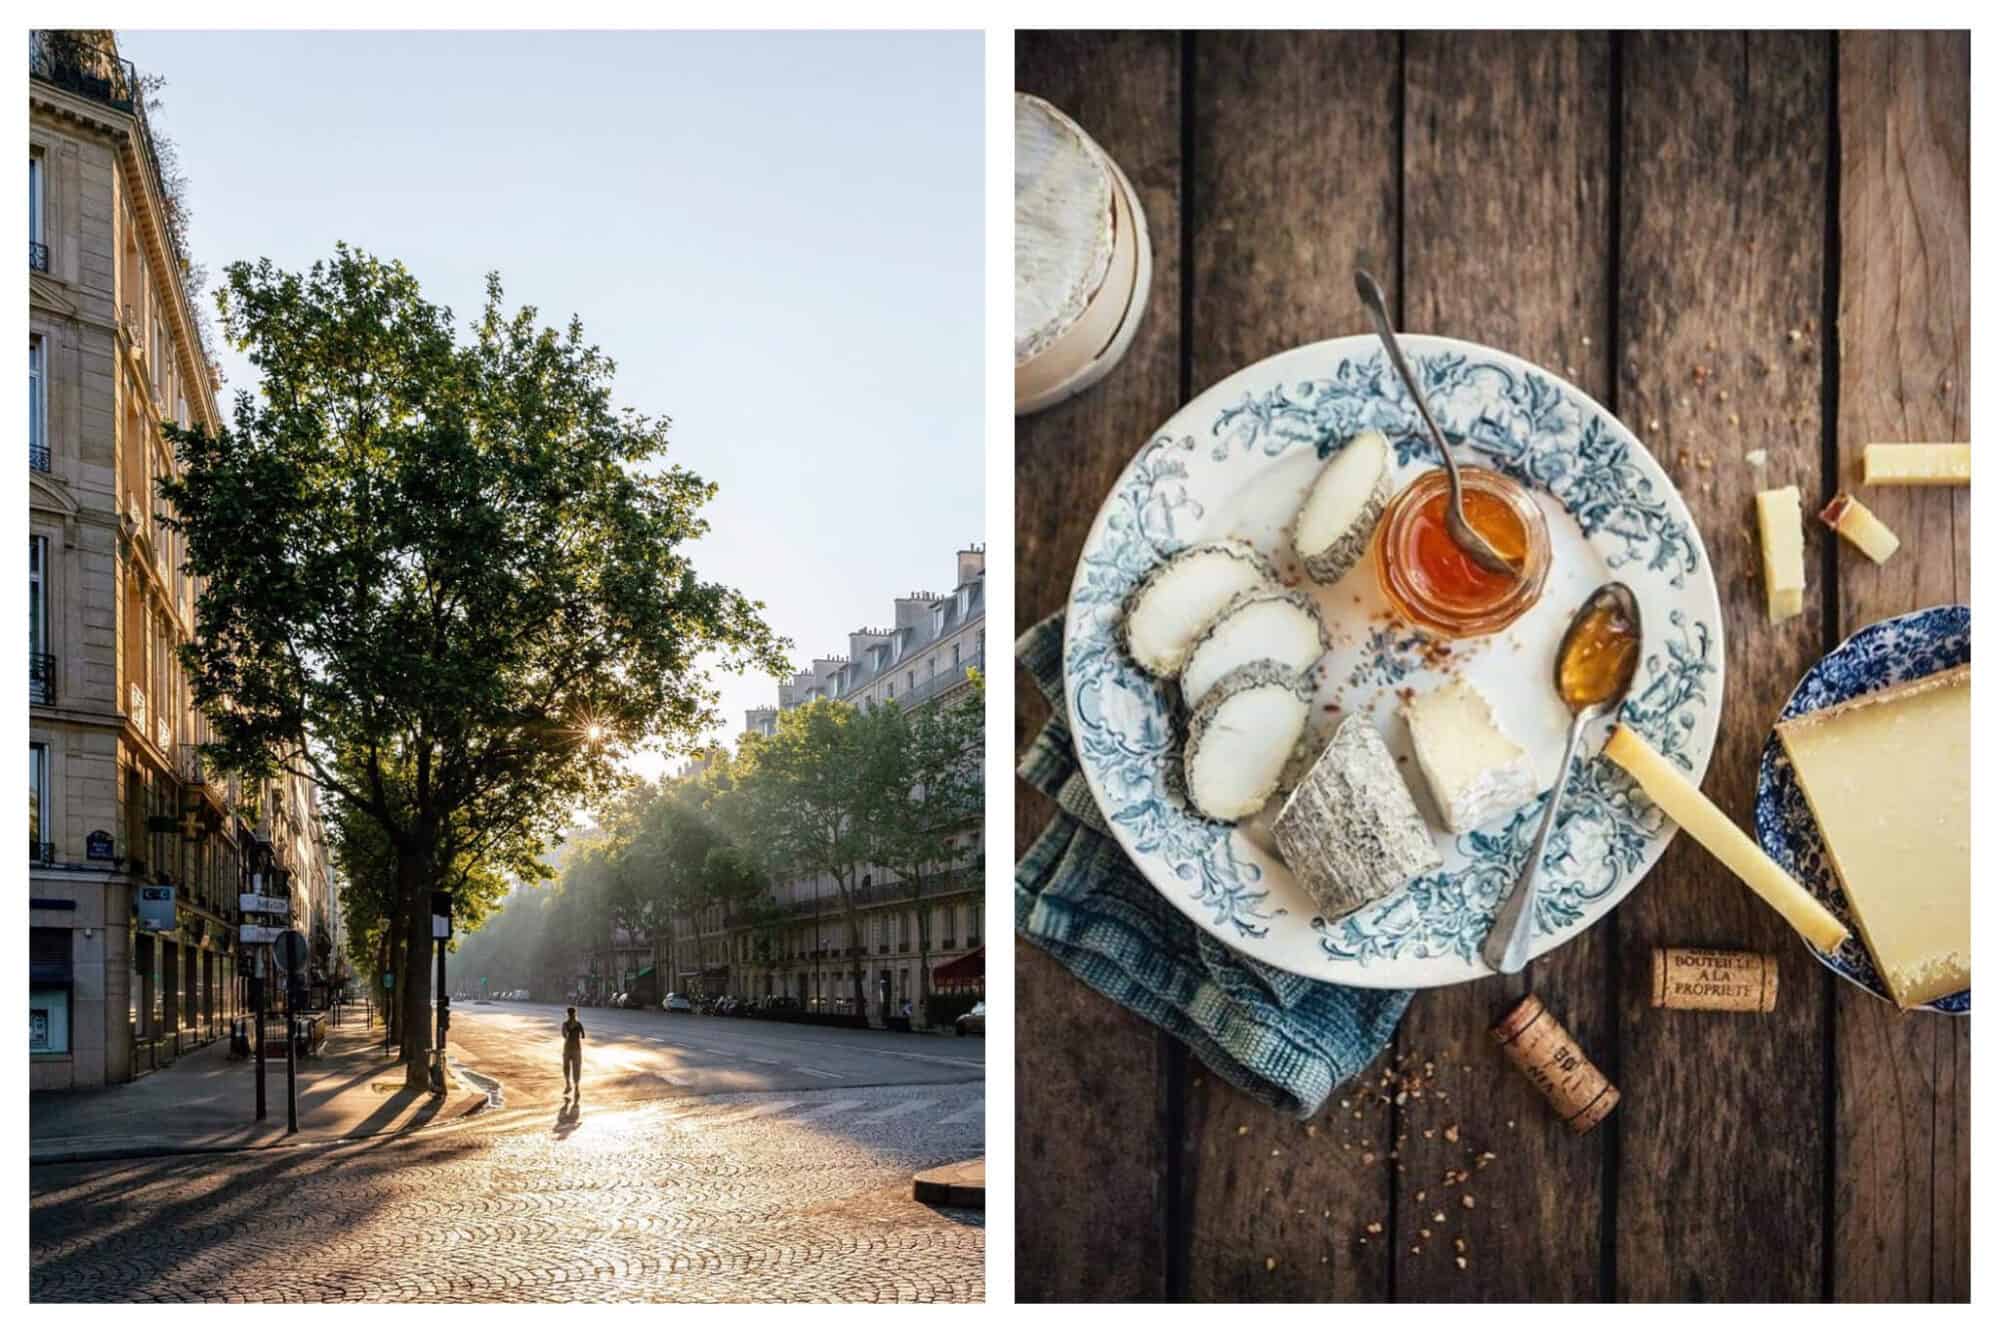 Left: A jogger runs down an empty street in Paris in the early evening, Right: a bouche of goat cheese, jar of confiture, wine corks and a slab of comté cheese sit on blue plates atop a wooden.